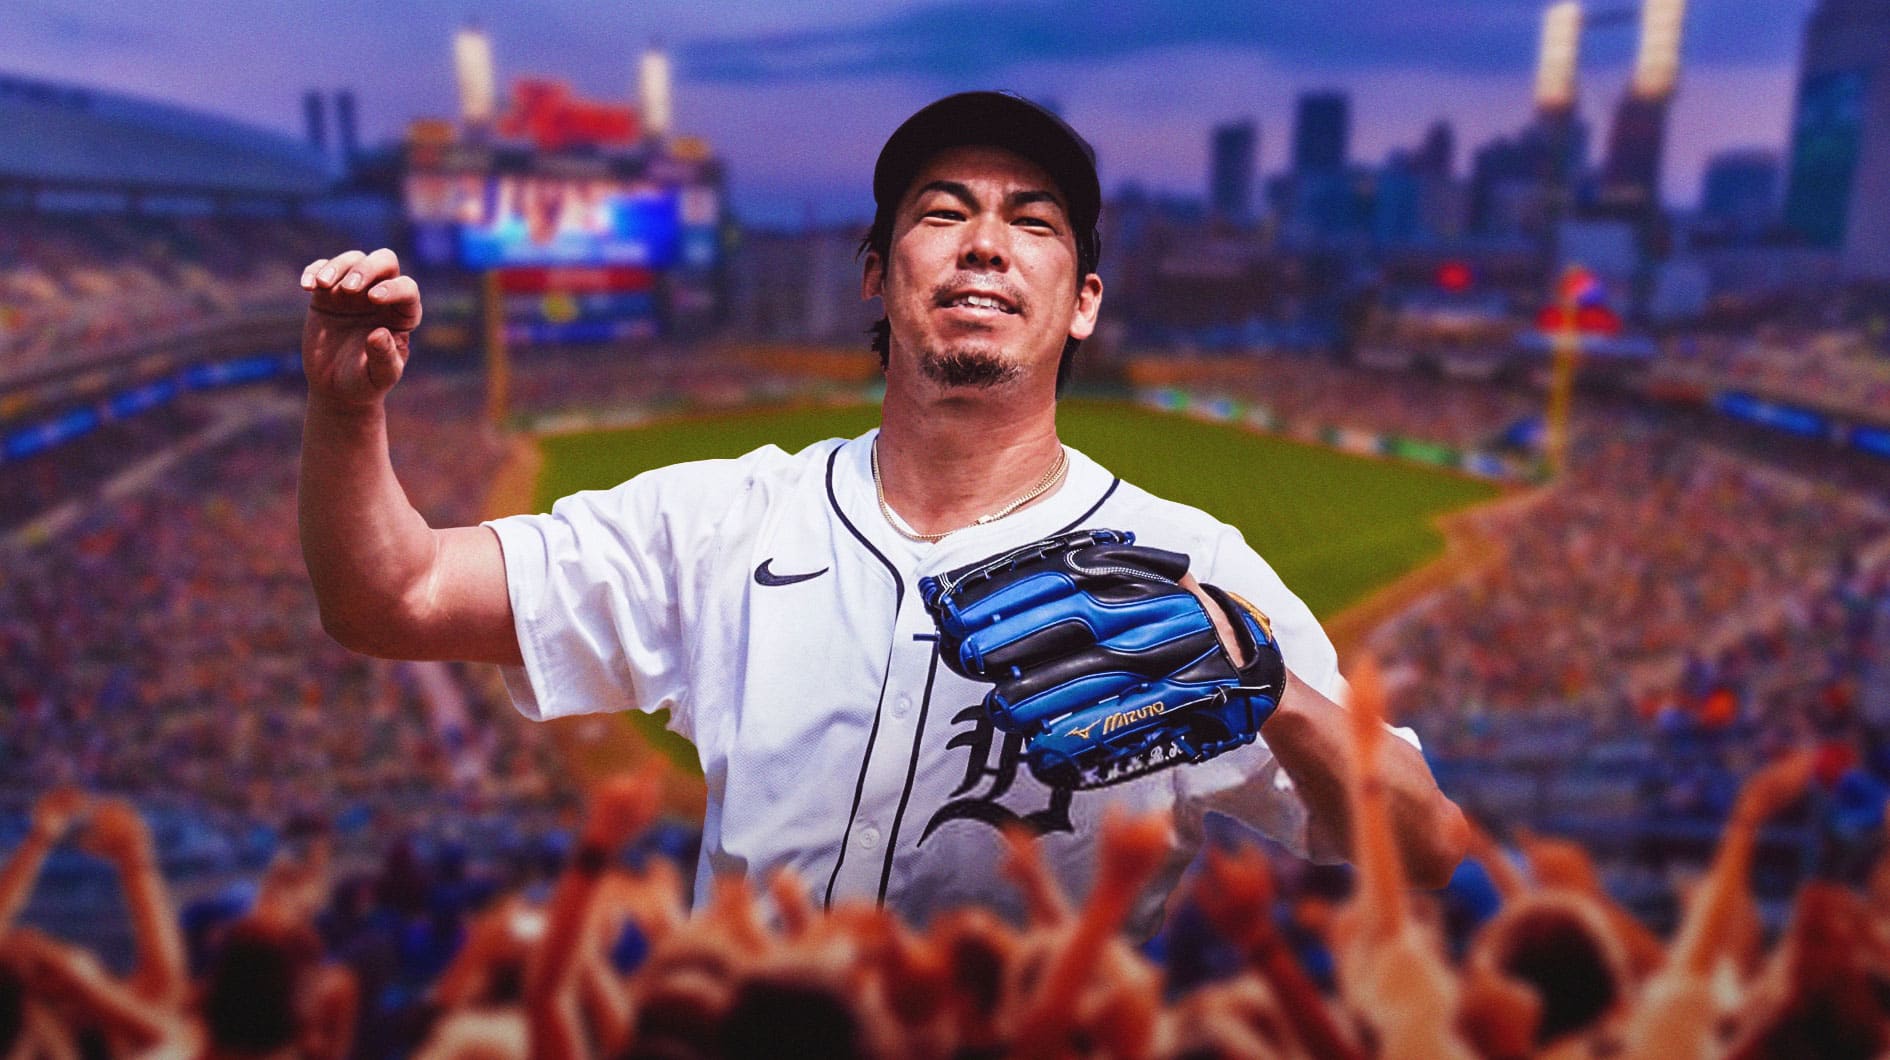 Tigers' Kenta Maeda reacts to heartfelt ovation after dominant Dodgers outing